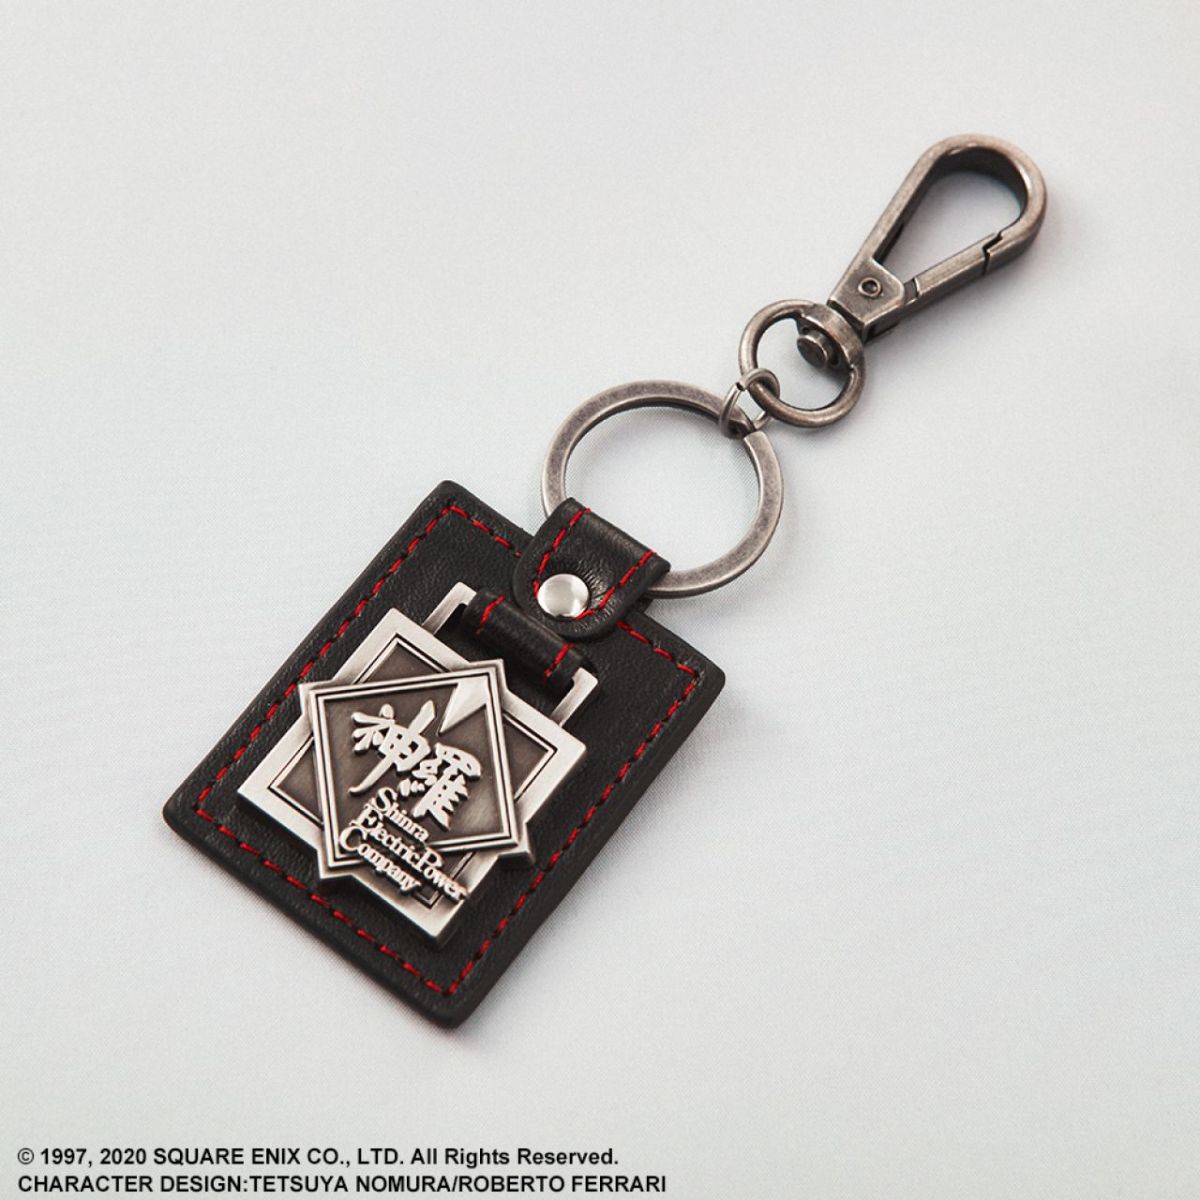 FFVII Remake Shinra ID Card Case, Pen Case, and Keychain Announced